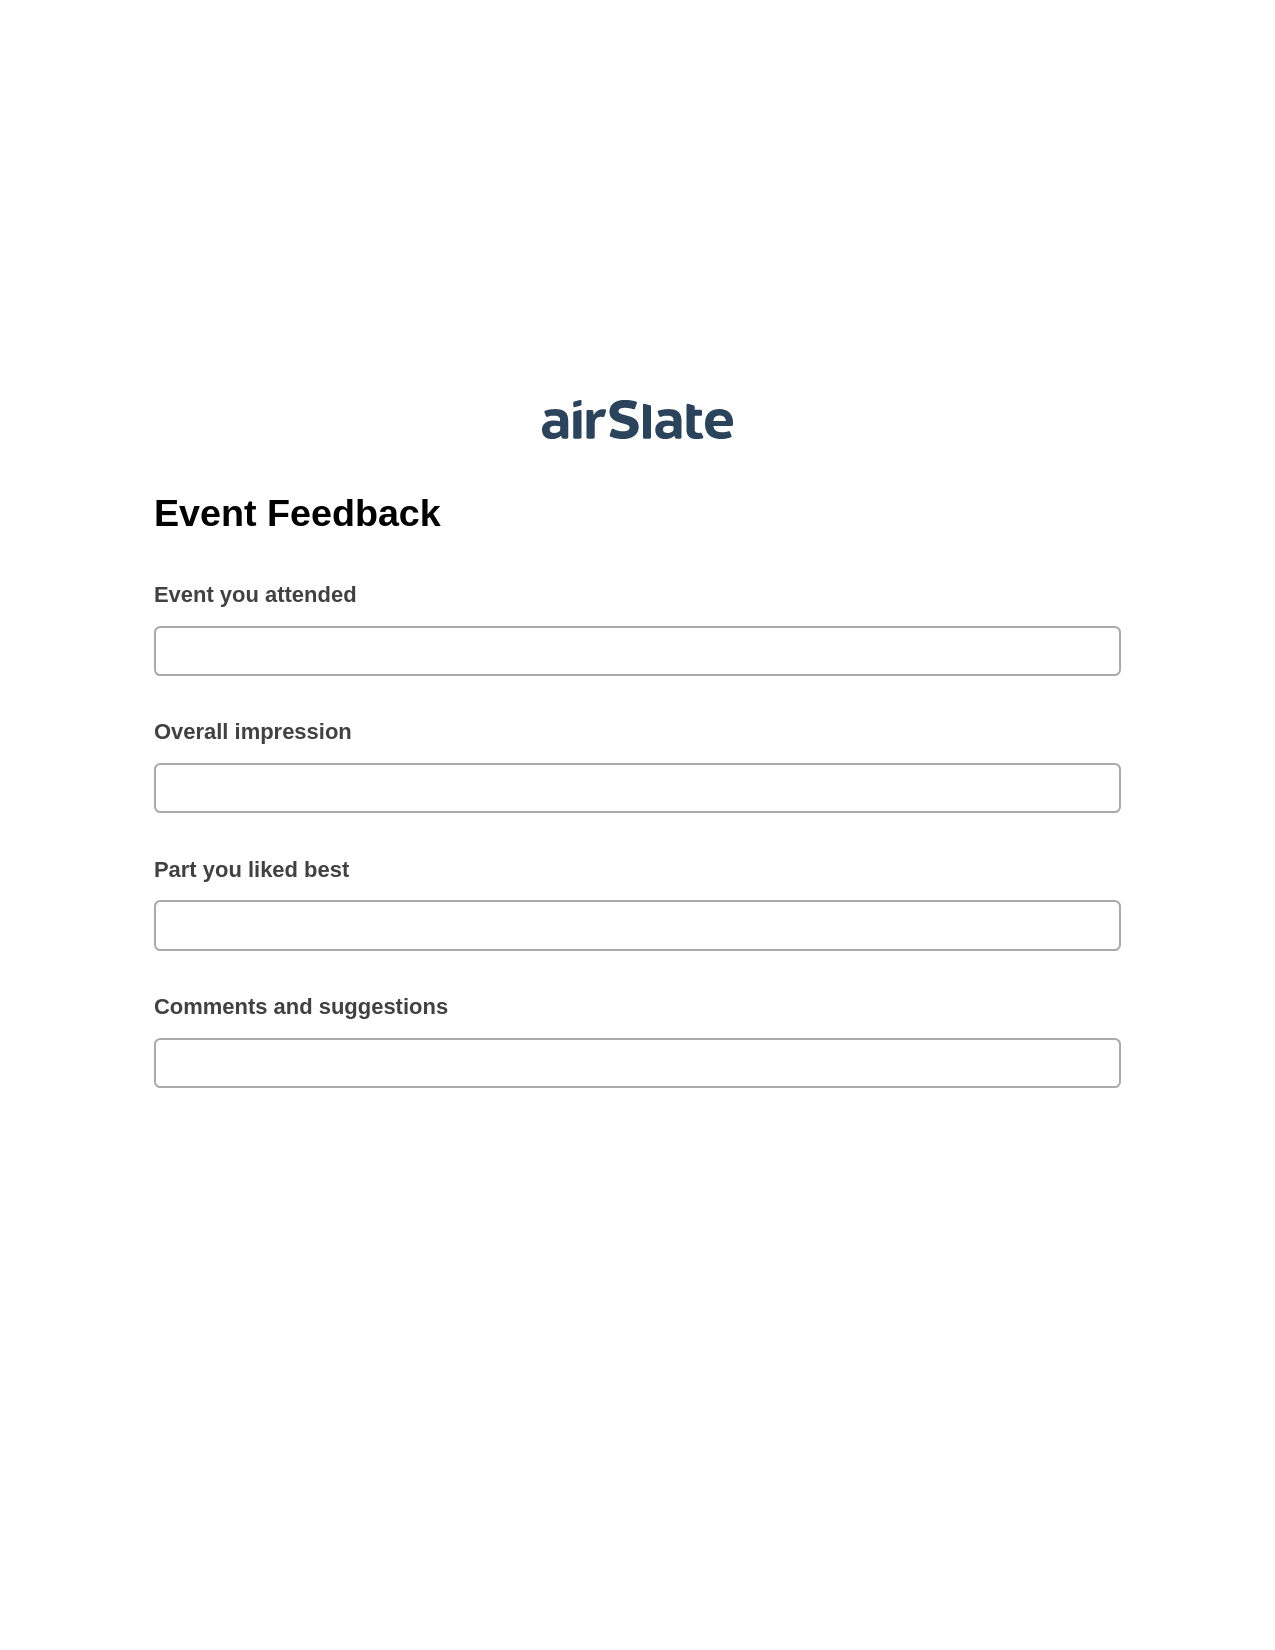 Event Feedback Pre-fill Document Bot, Reminder Bot, Box Bot